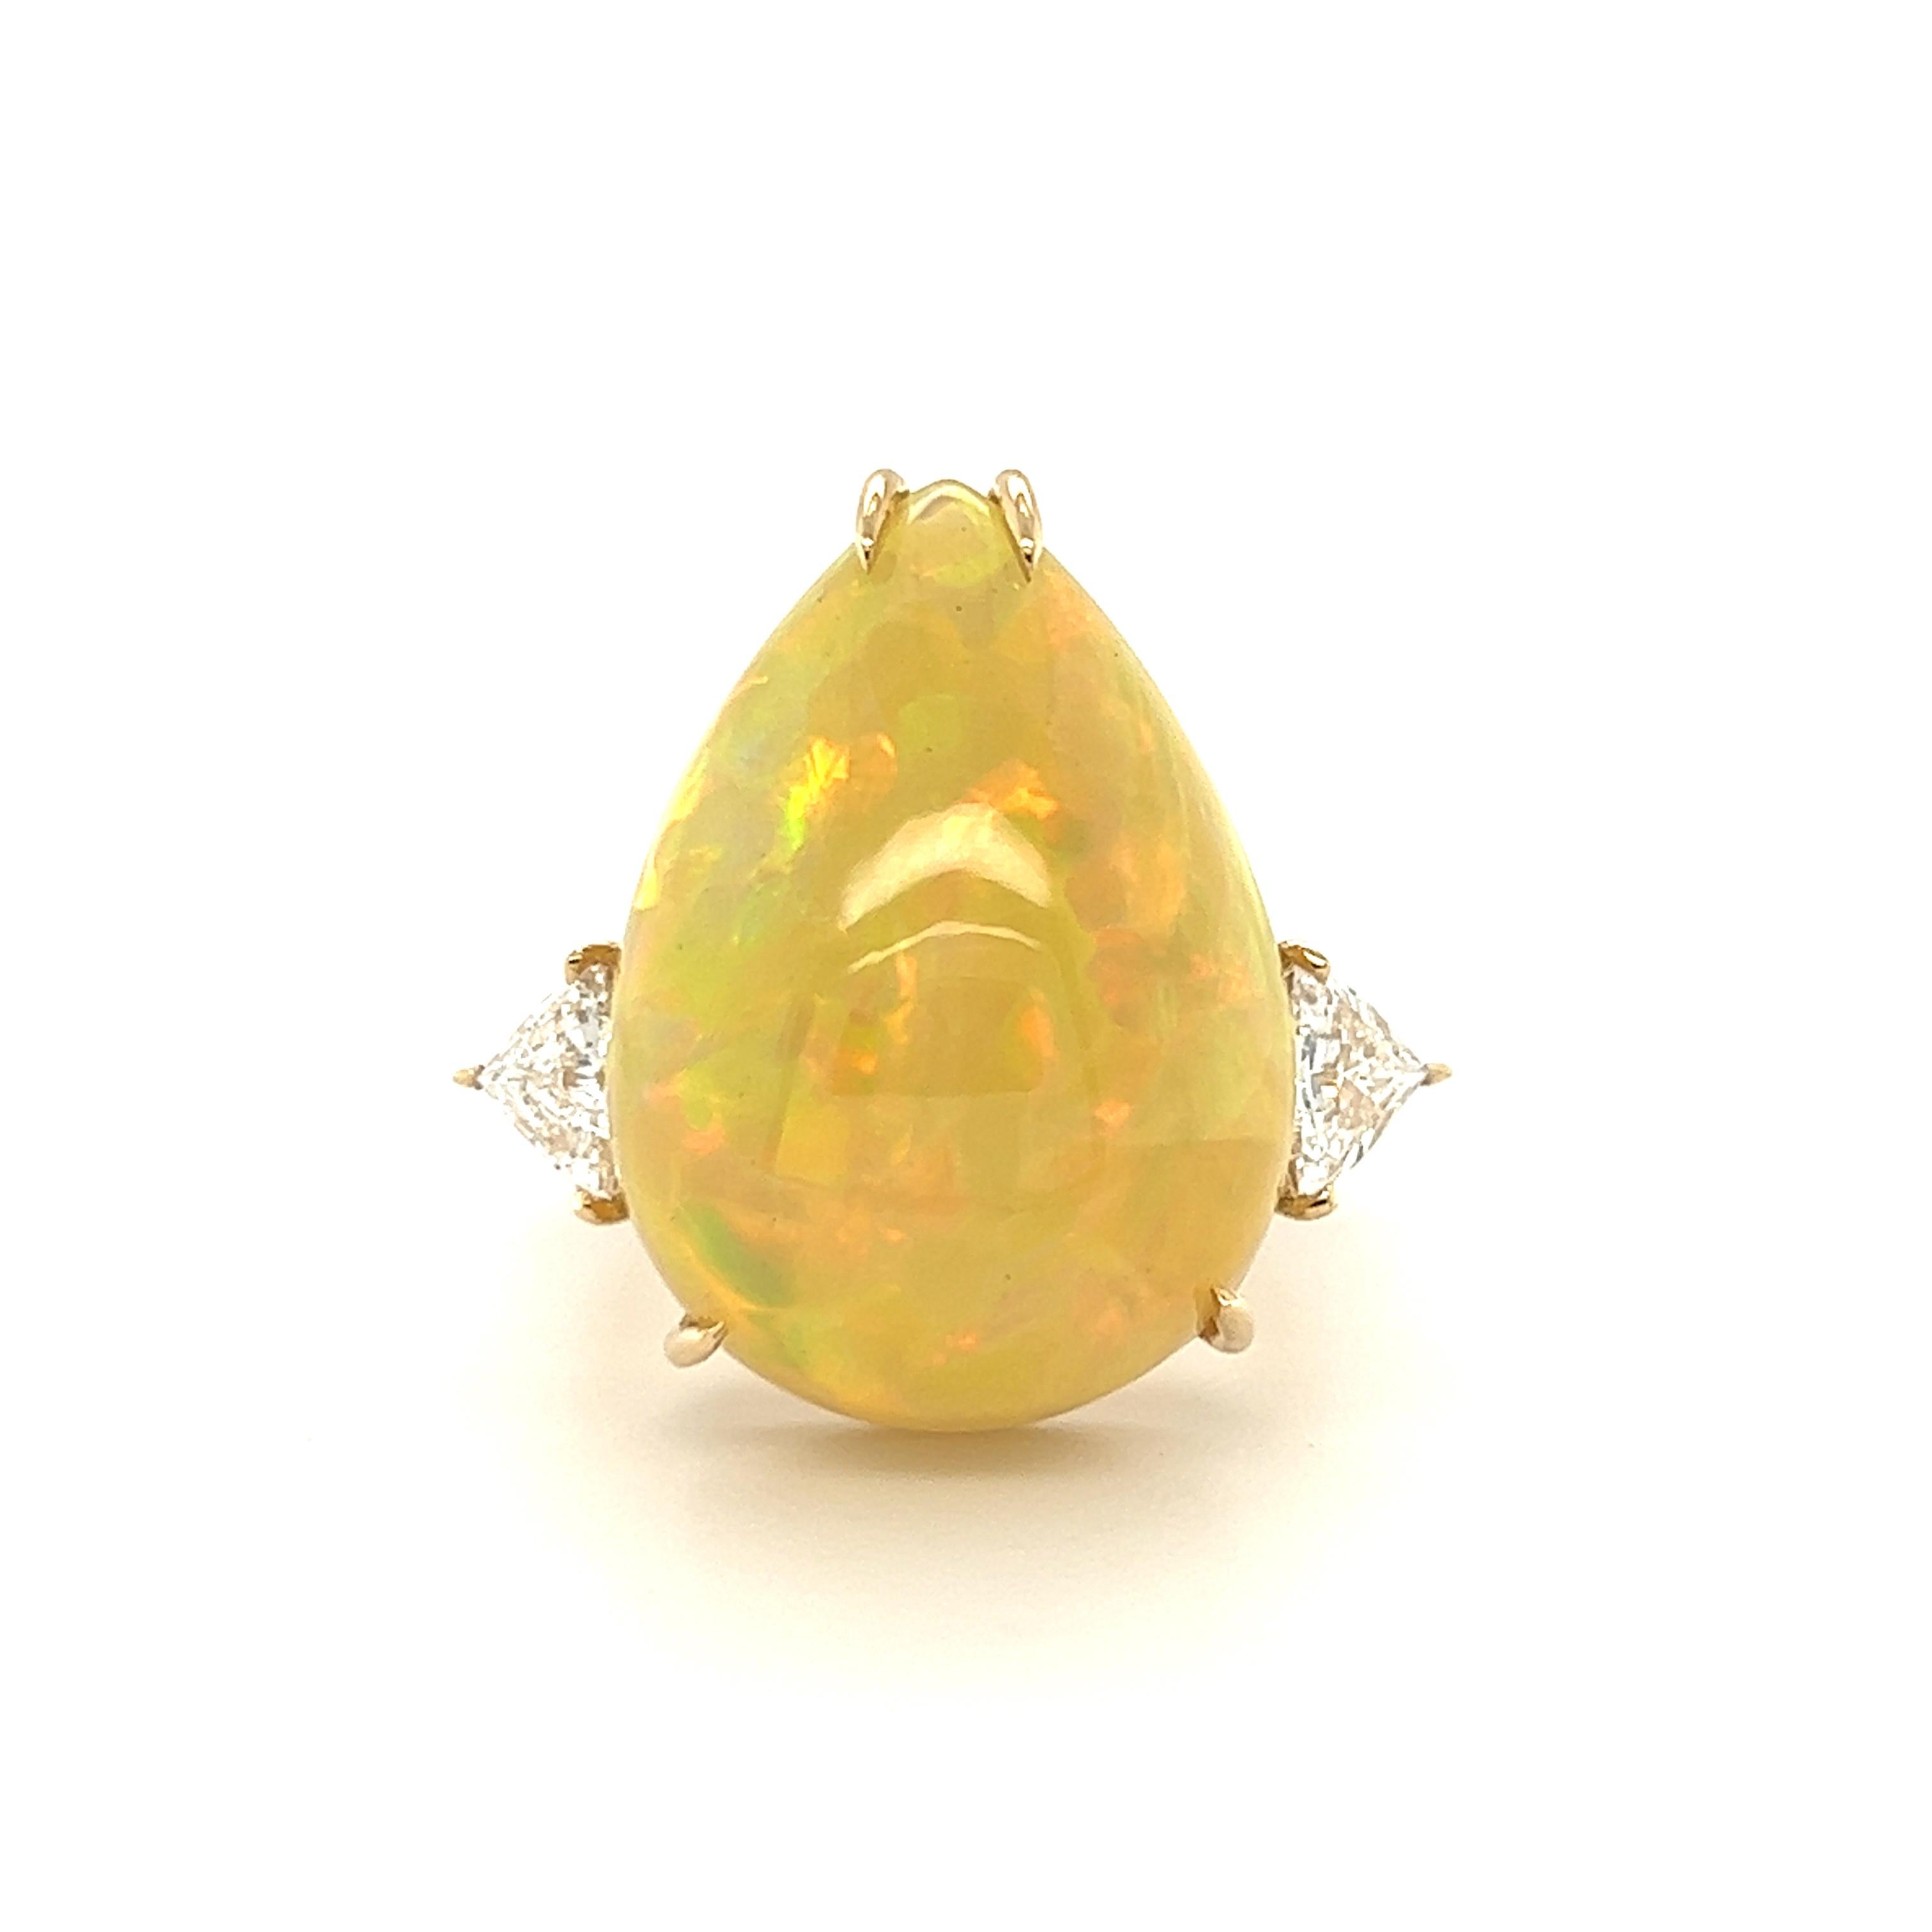 Beautiful Pear shape Fire Opal weighing 18.30 Carats flanked by Triangle diamonds weighing 1.11 carats. 

Set in 18 Karat Yellow Gold. 
Finger size 7